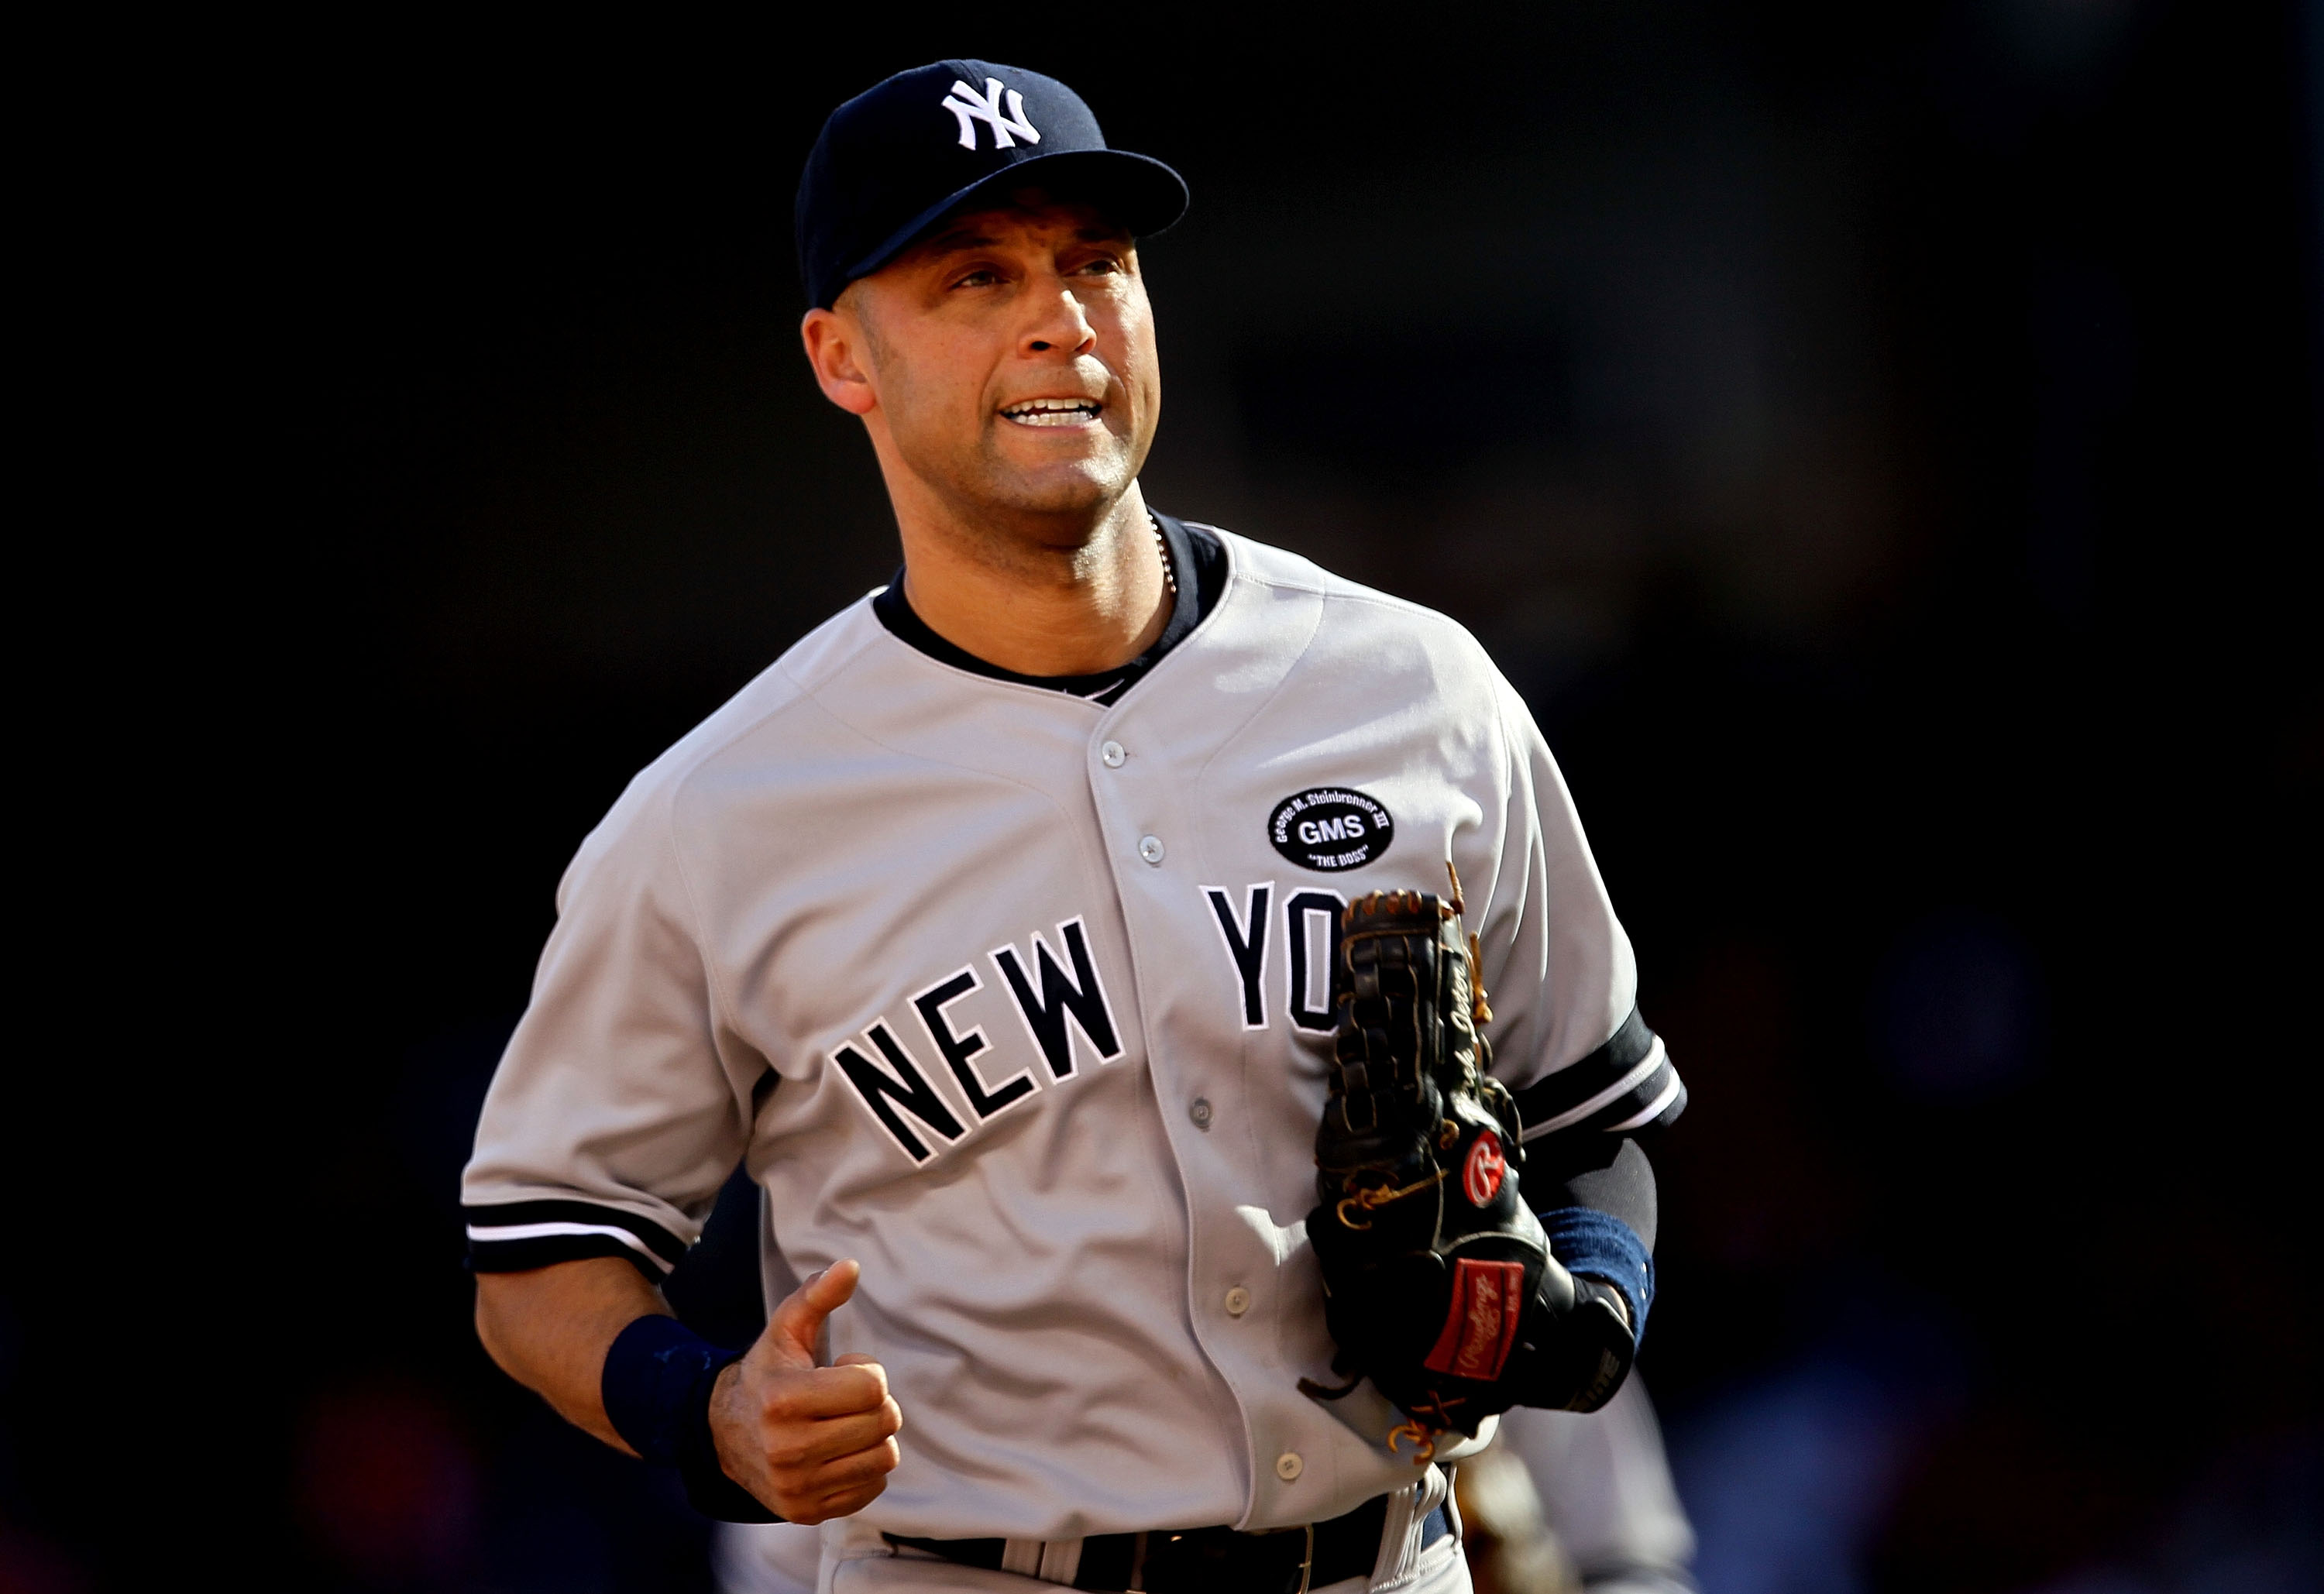 New York Yankees Legend Derek Jeter Would Not Use This Very Personal Item  to Raise Money For Charity Despite His Annual $250,000 Pledge -  EssentiallySports